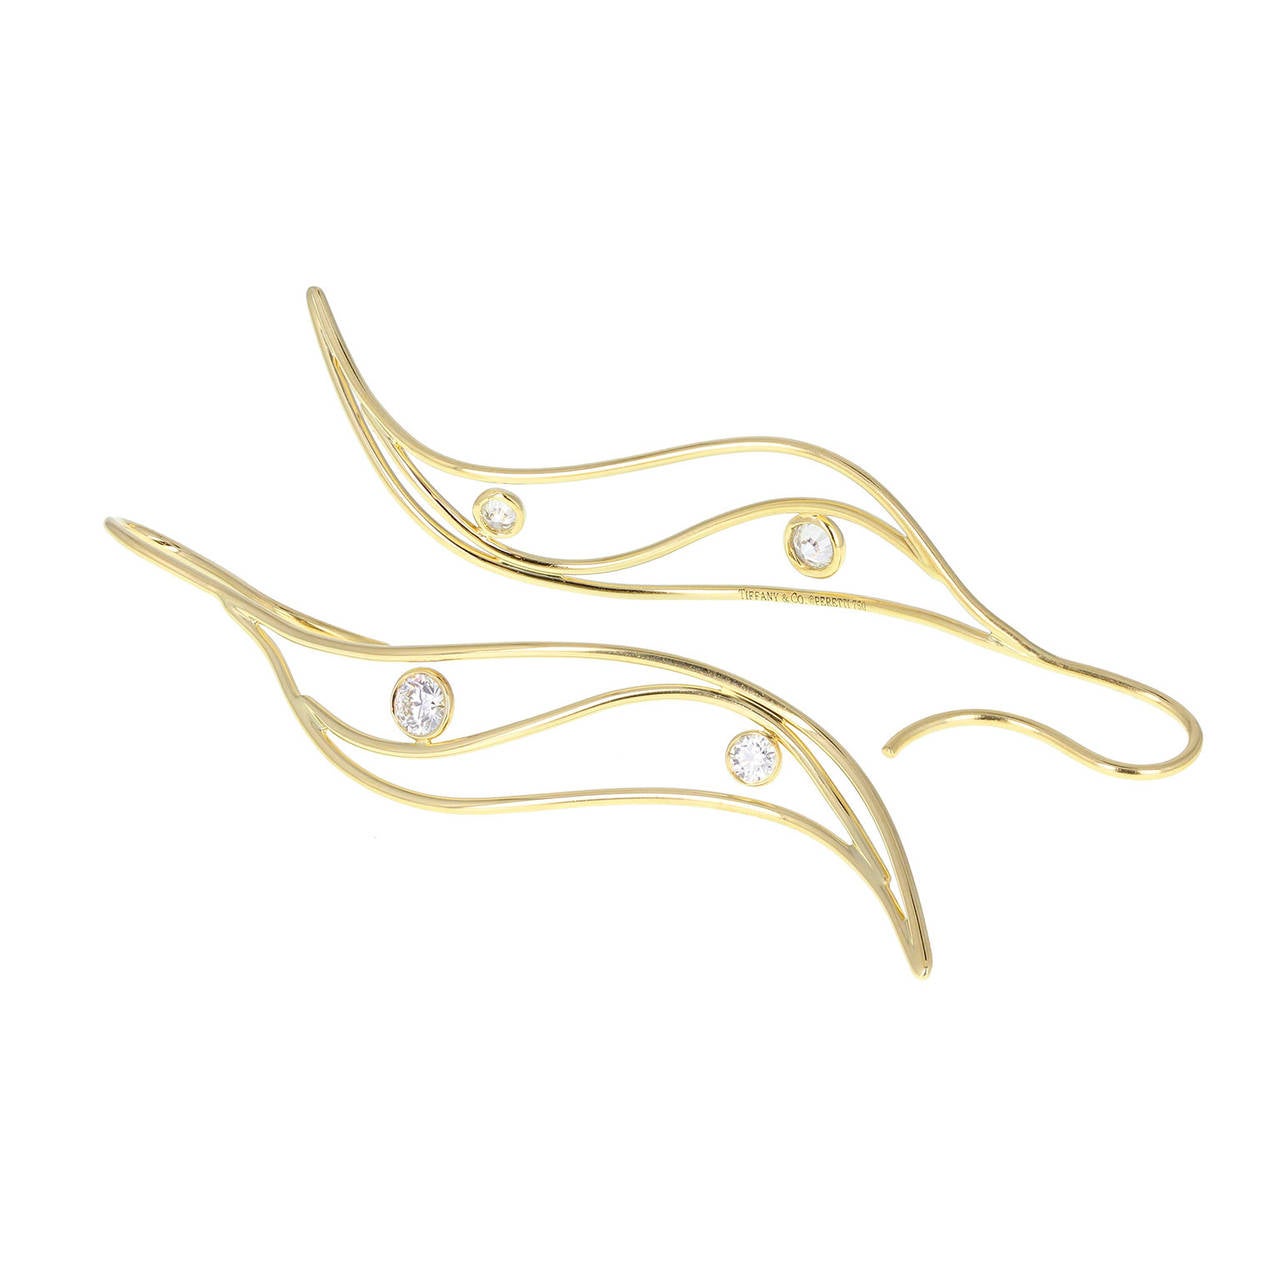 Designed by Elsa Peretti for Tiffany & Co. in the form of two organic curved leaf drops. Fashioned from 18 carat gold wire and each set with two round brilliant-cut diamonds totaling 0.60 of a carat with G colour and VVS clarity. Signed Tiffany &